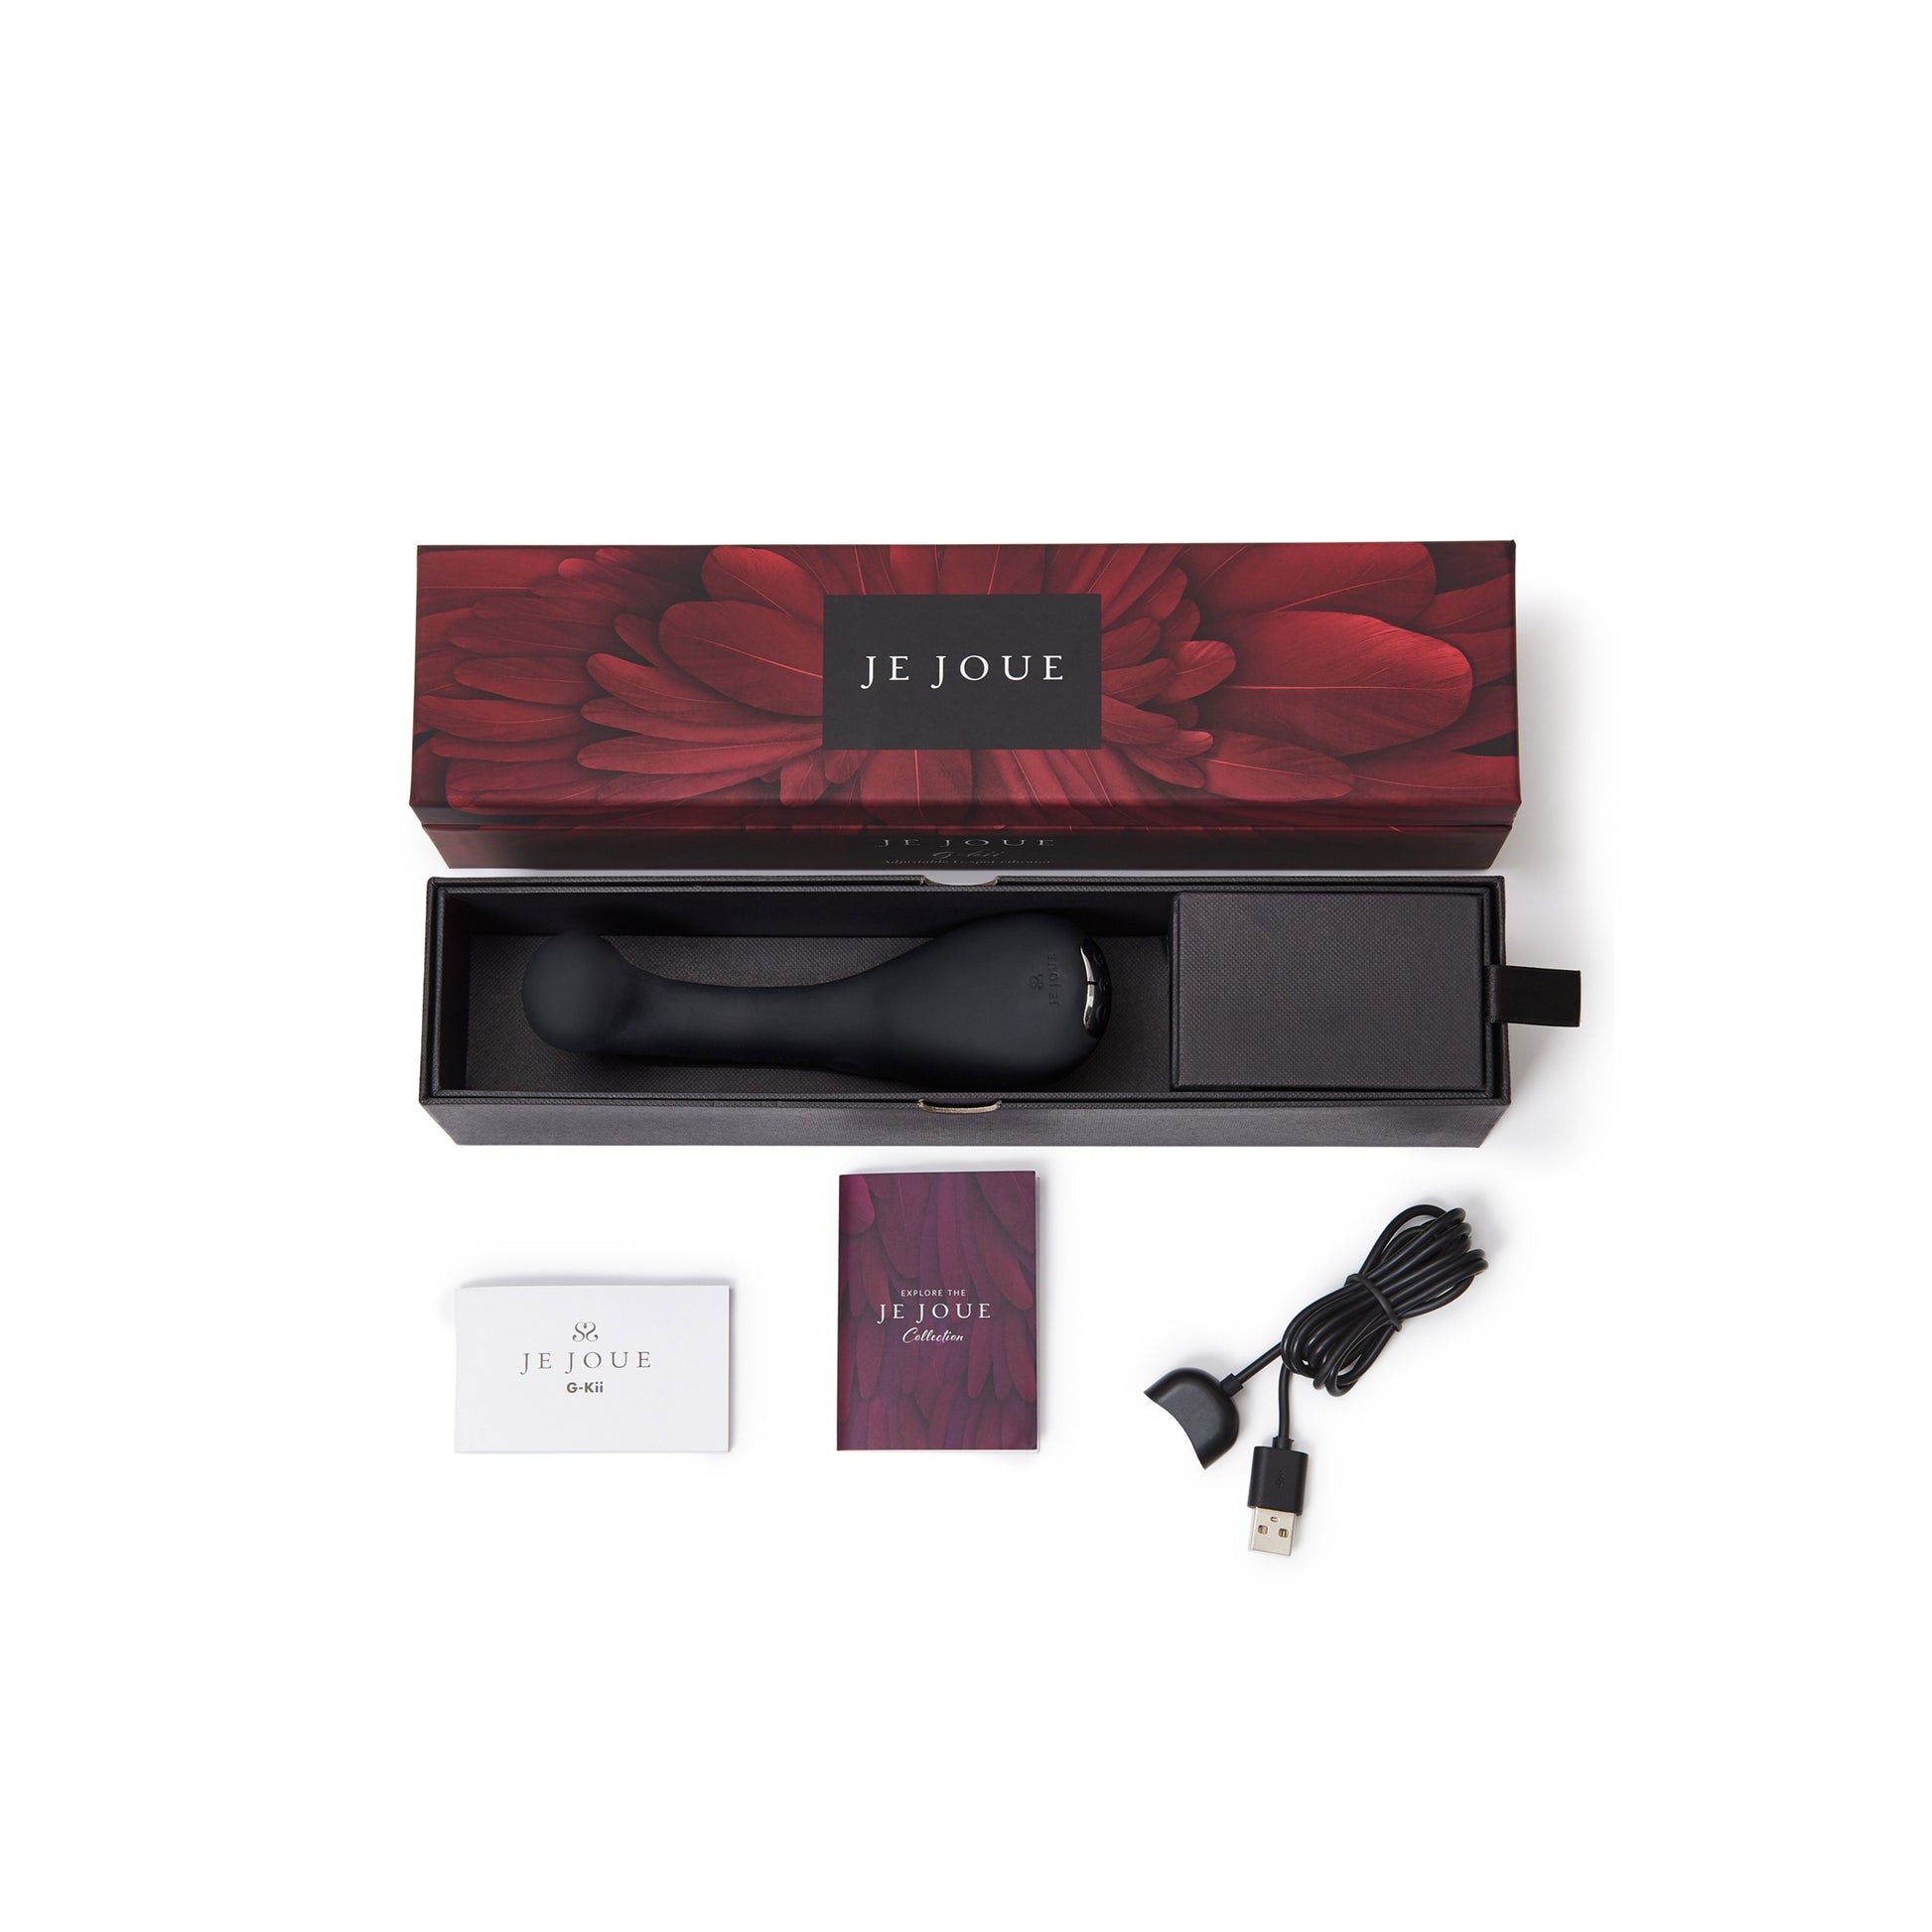 G Kii Vibrator in box with accessories on side